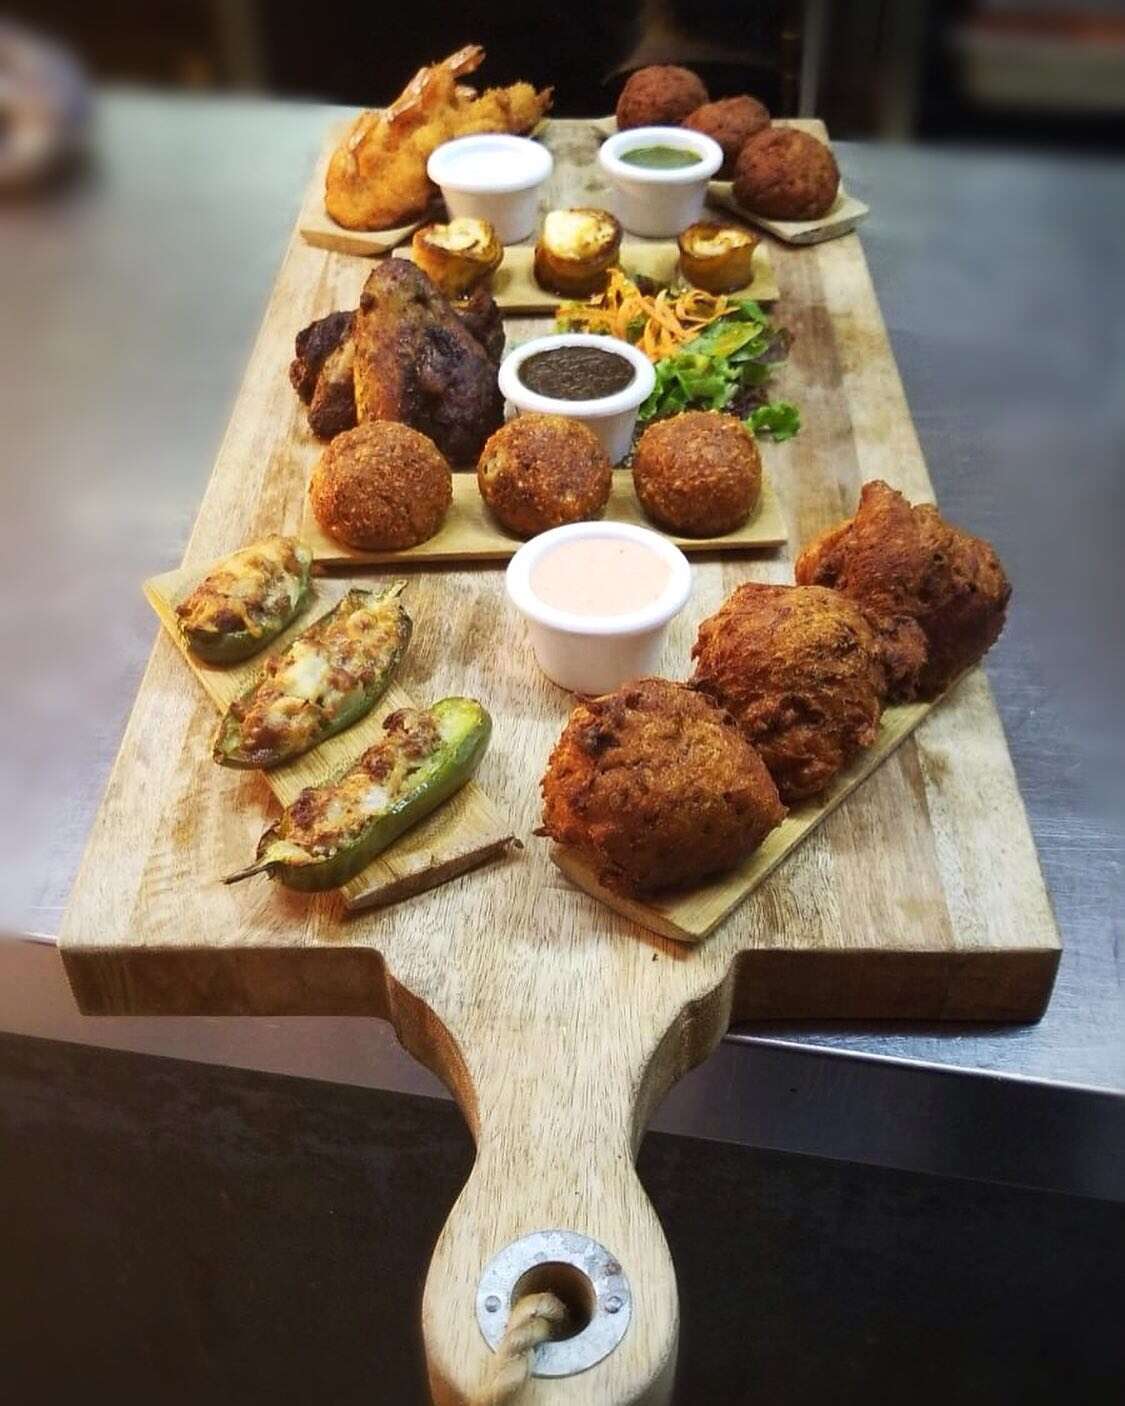 Food laid out on a wooden board